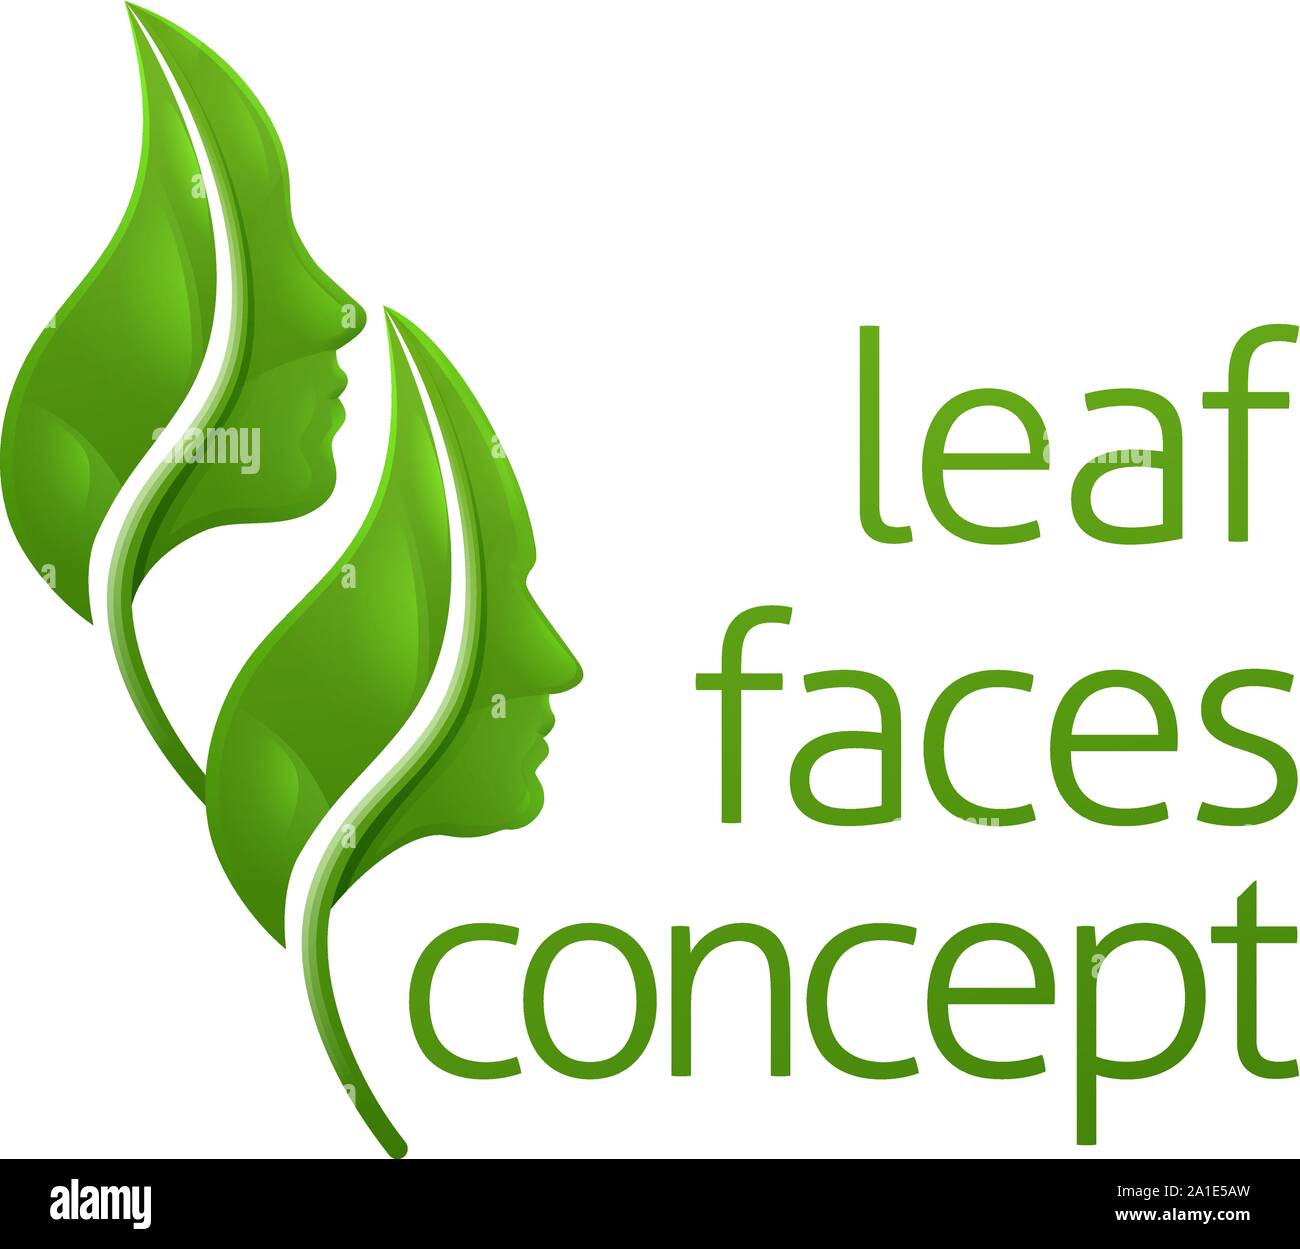 Optical Illusion Leaf Faces Concept Stock Vector